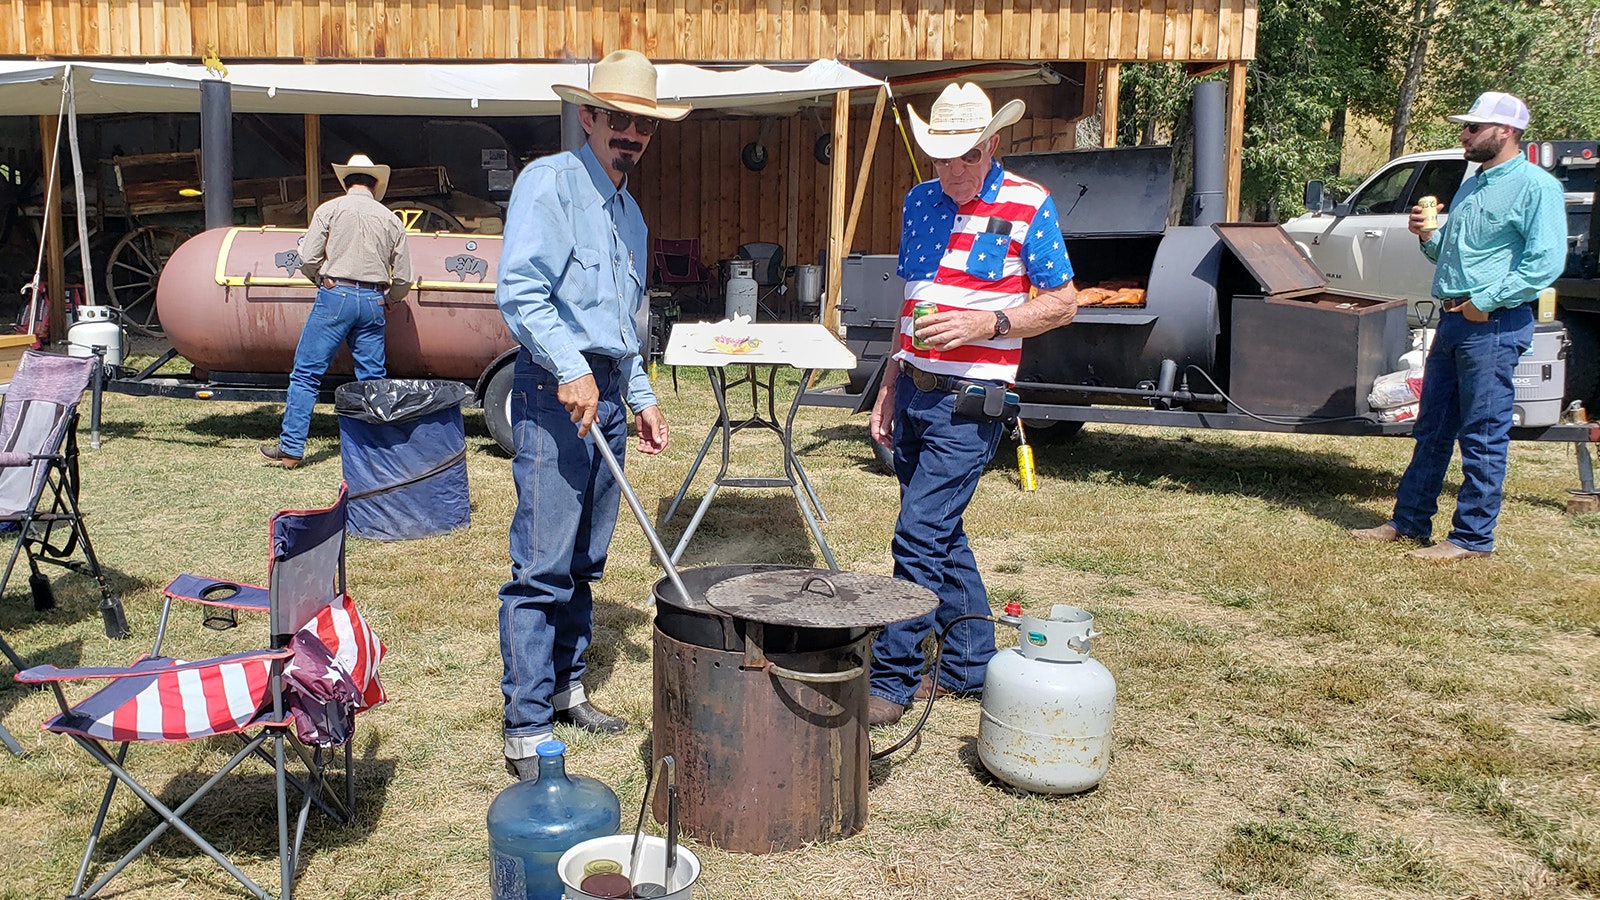 Keith Duncan, left, stirs the pot of community beans he's making for the Savery Picnic while Blaine Woods looks on.